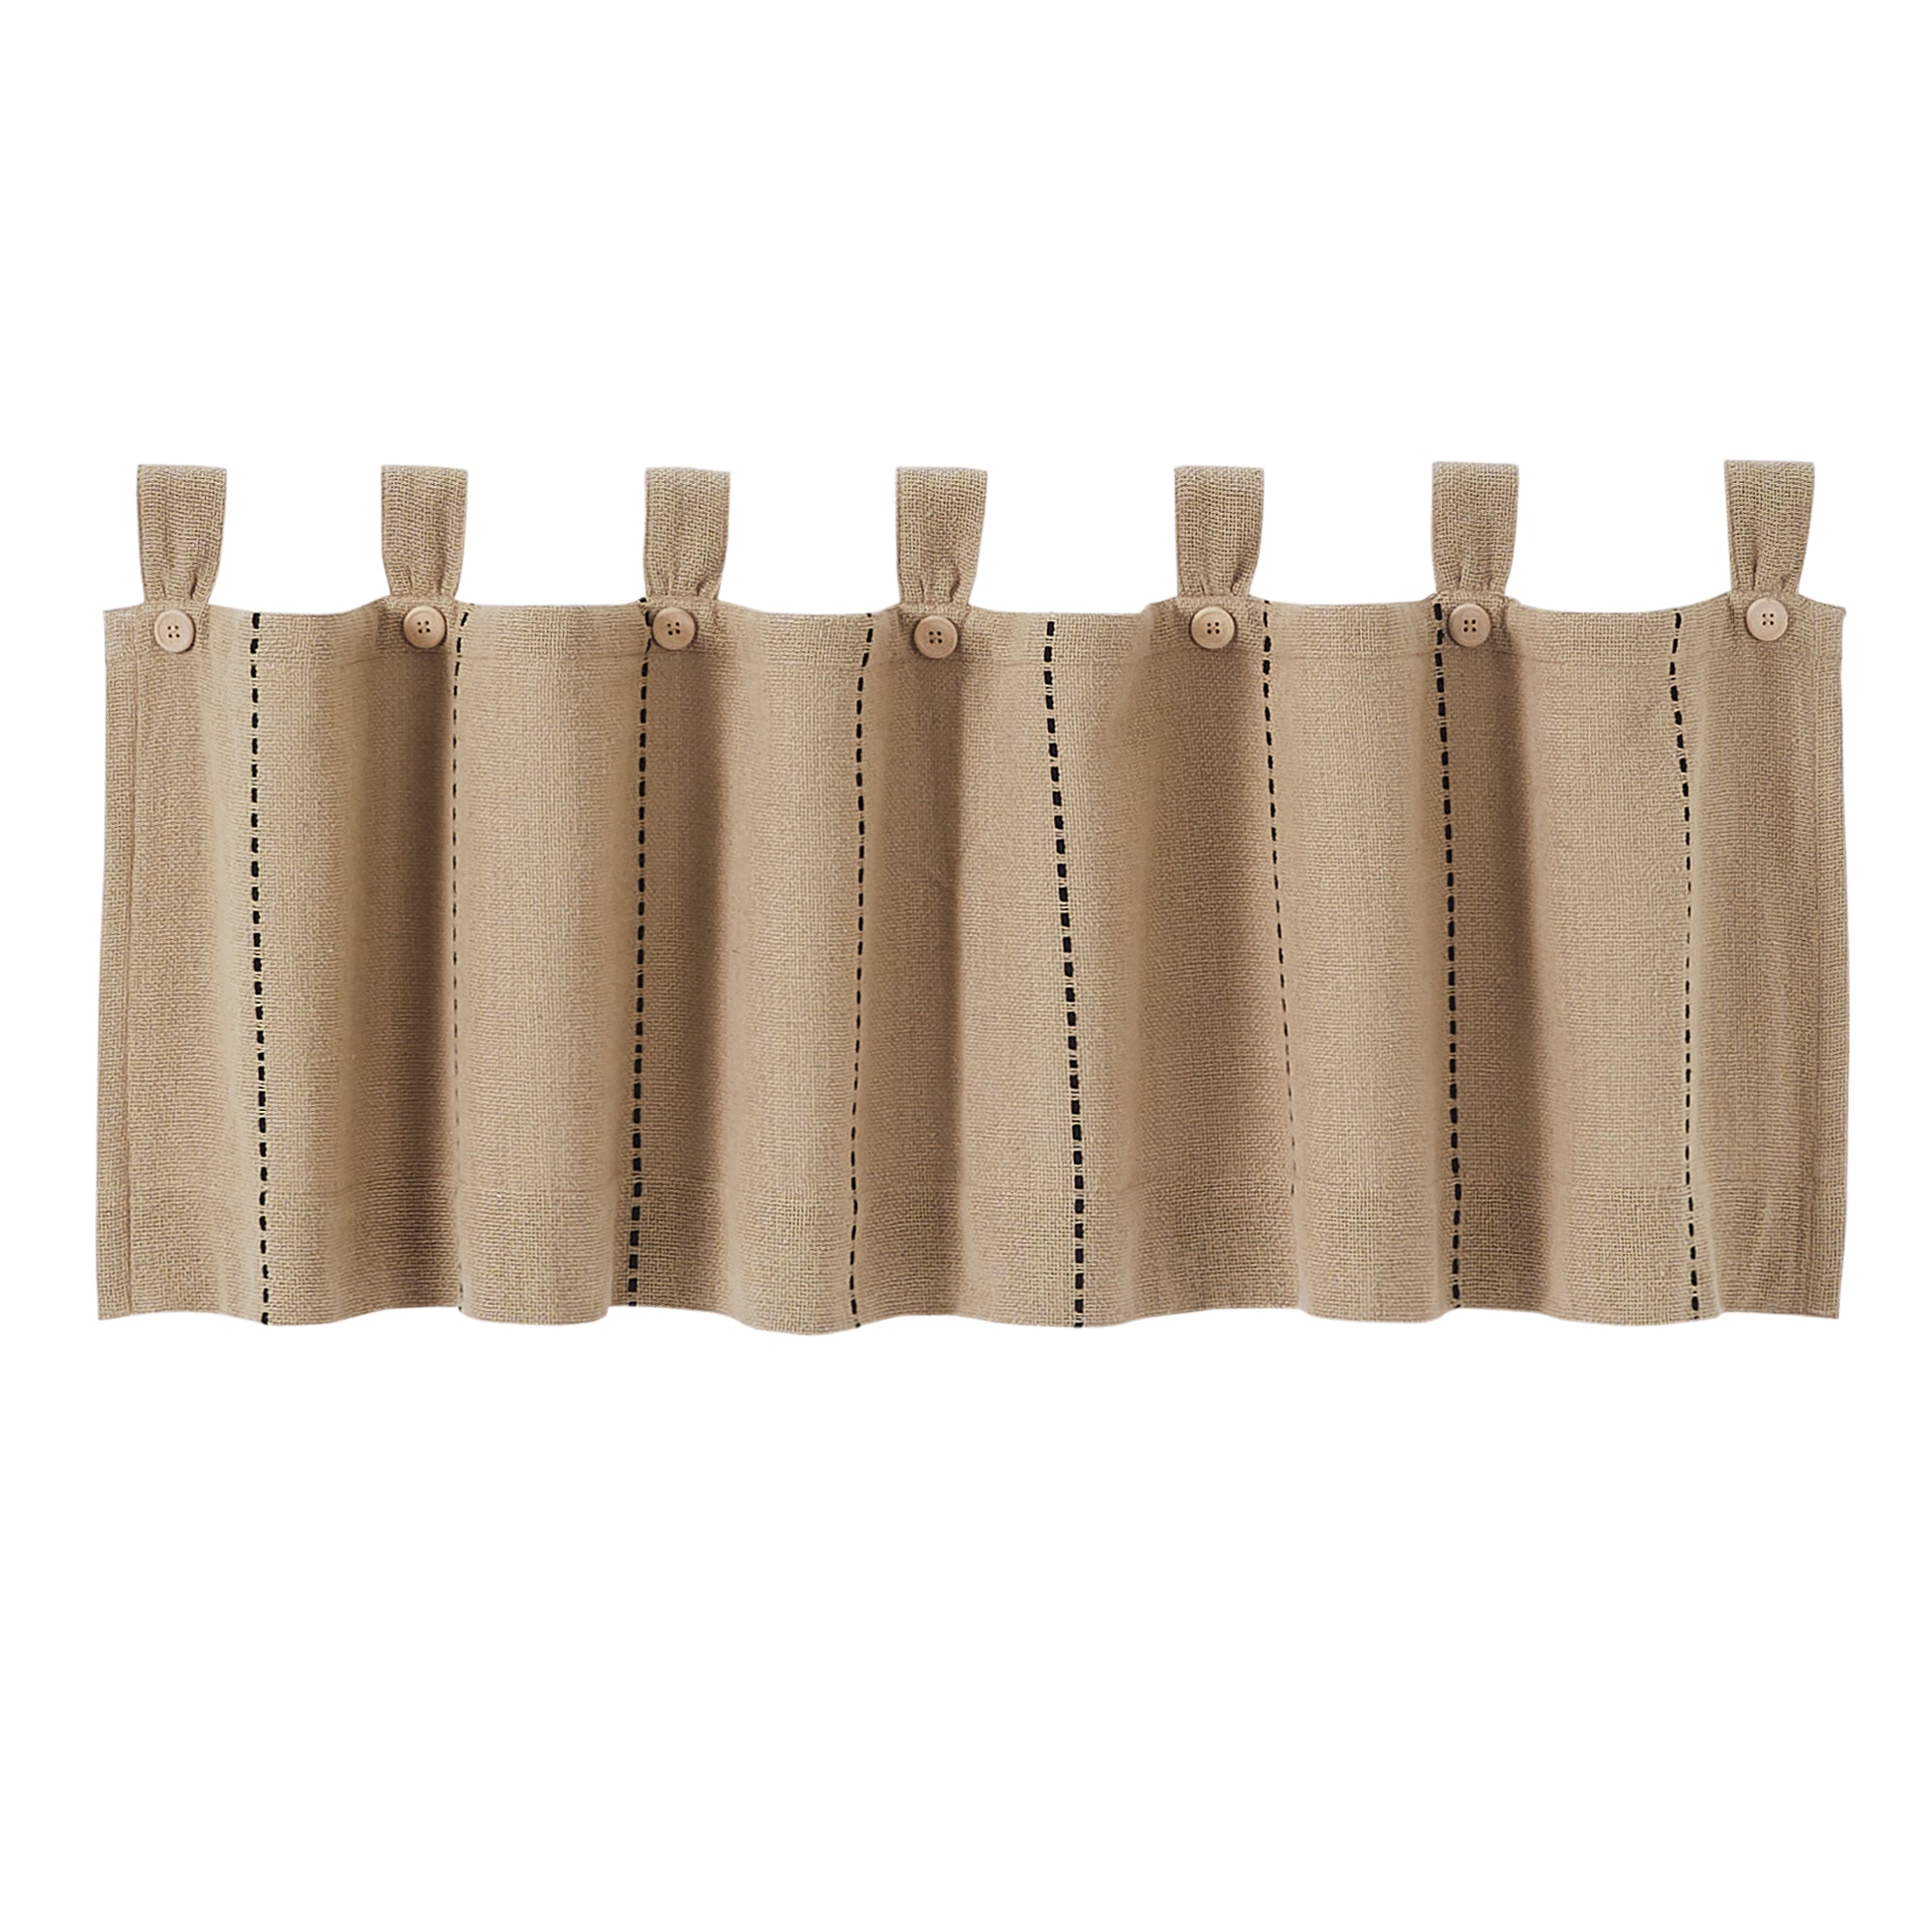 Stitched Burlap Natural Valance Curtain 16x60 VHC Brands